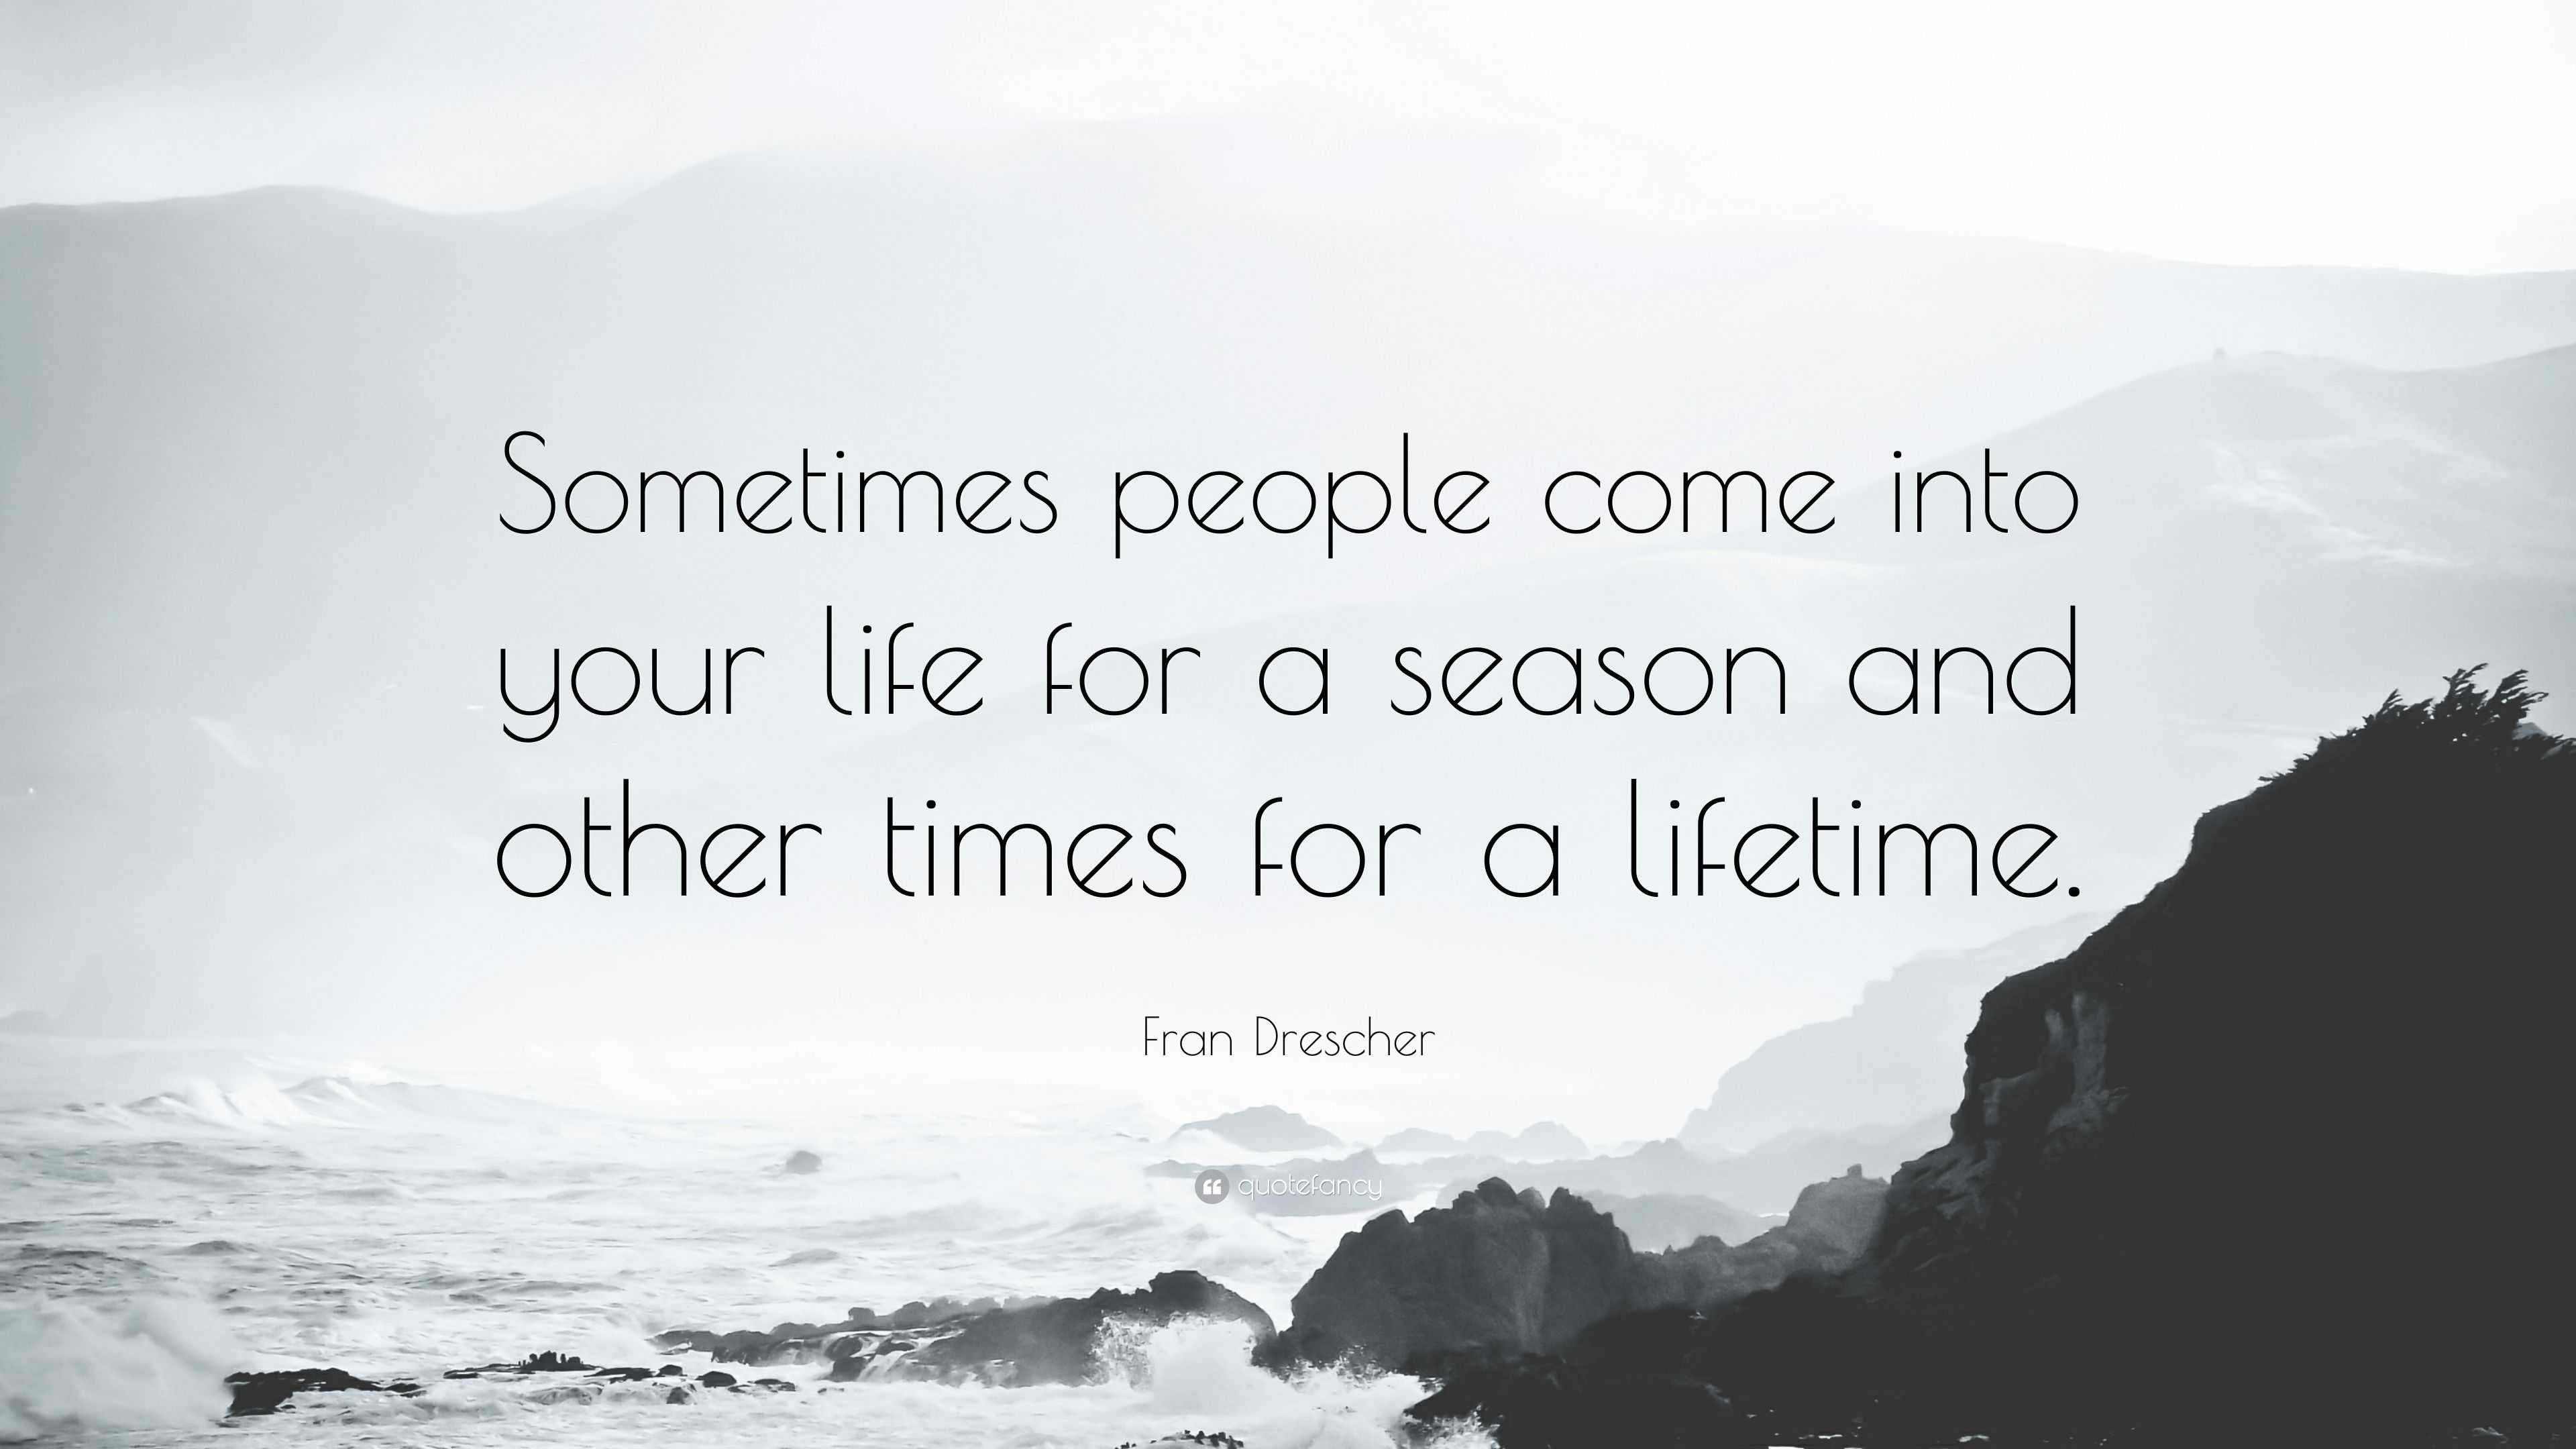 Fran Drescher Quote: “Sometimes people come into your life for a season ...